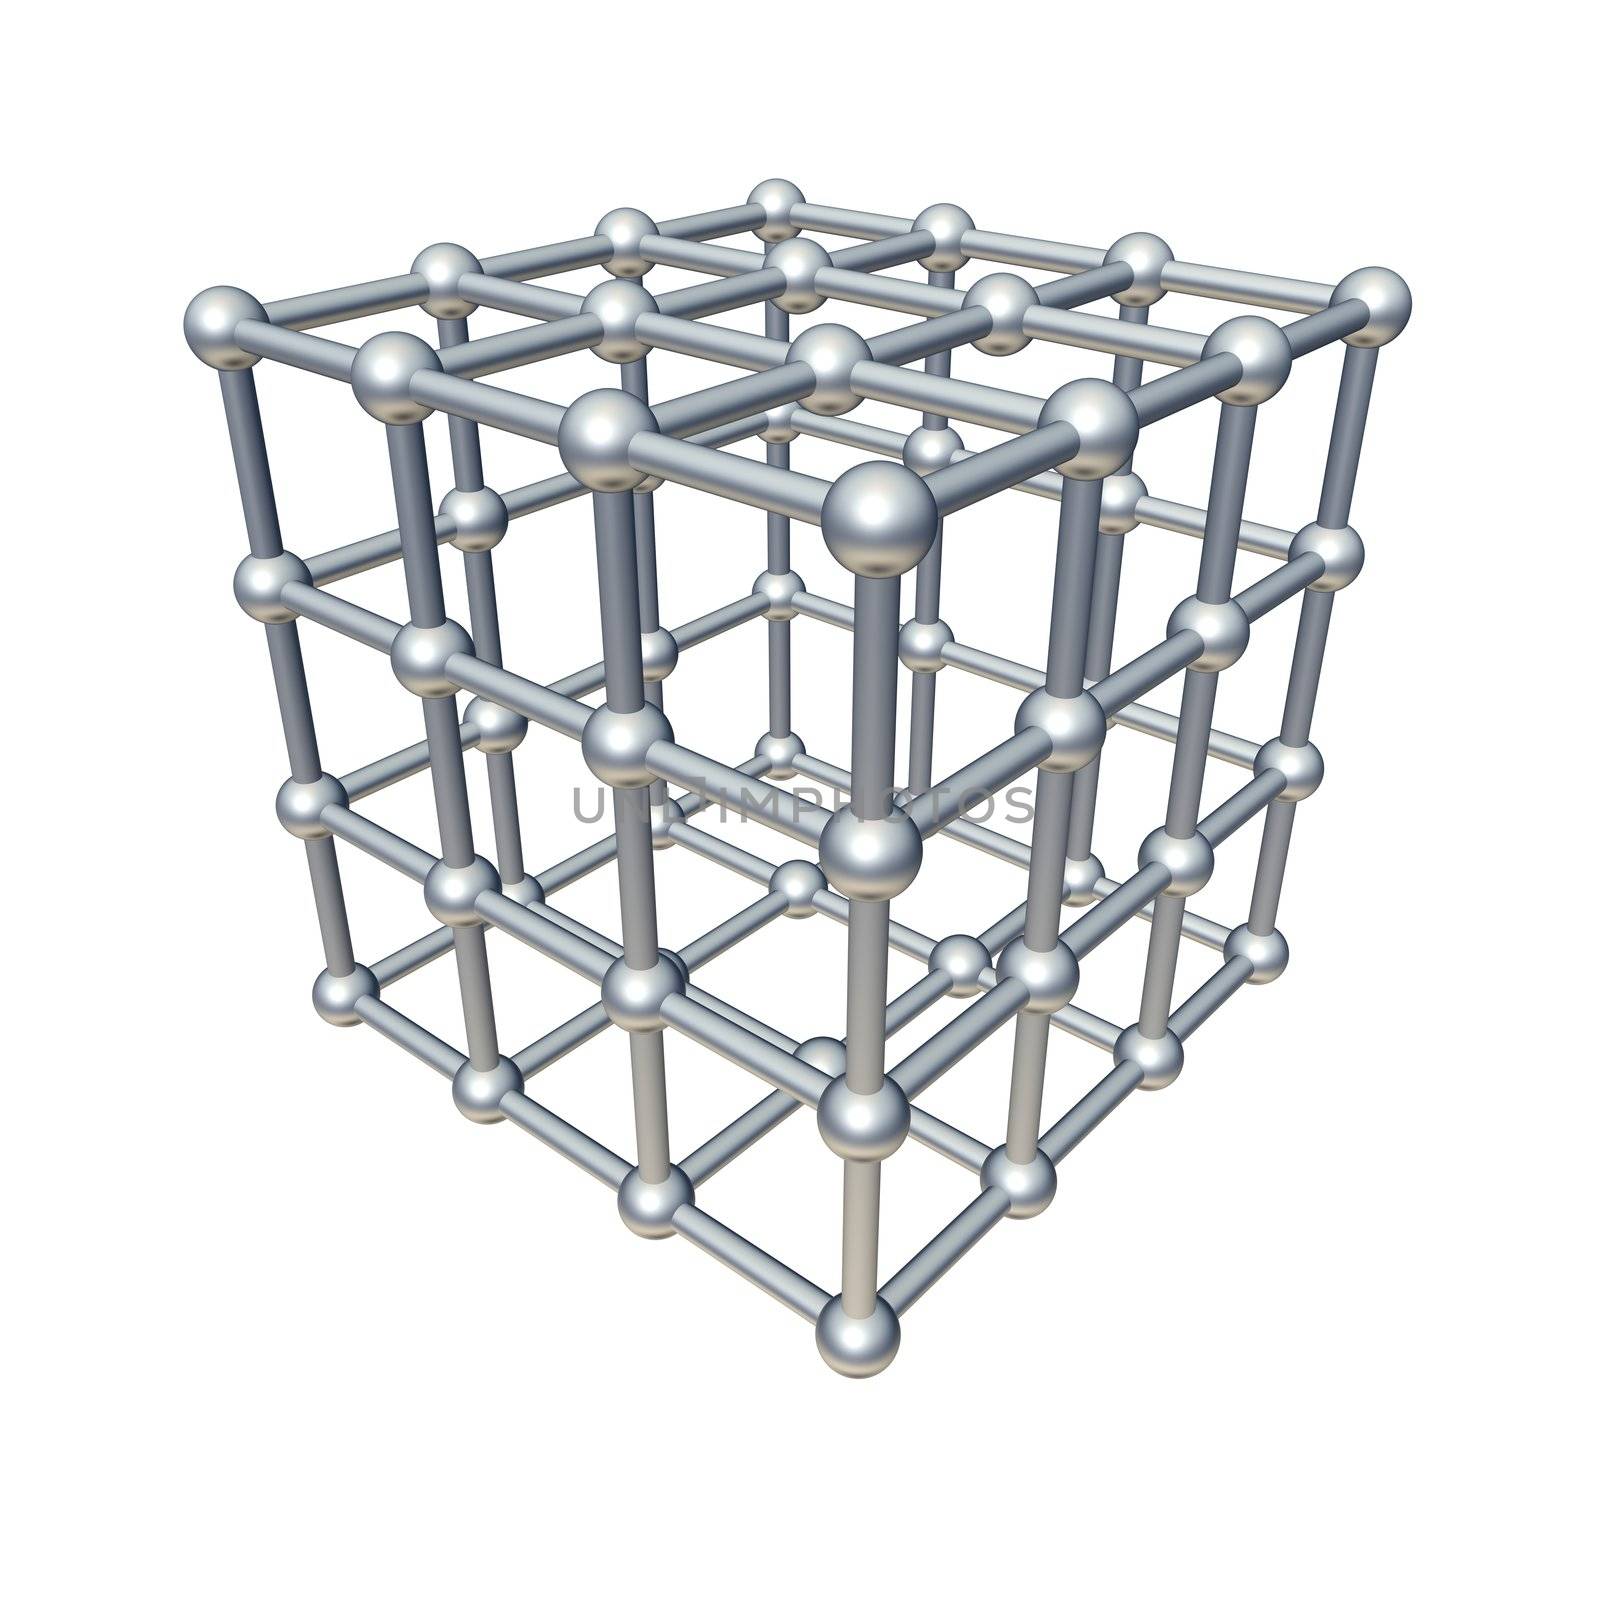 Cube model isolated on white. 3d rendered illustration.